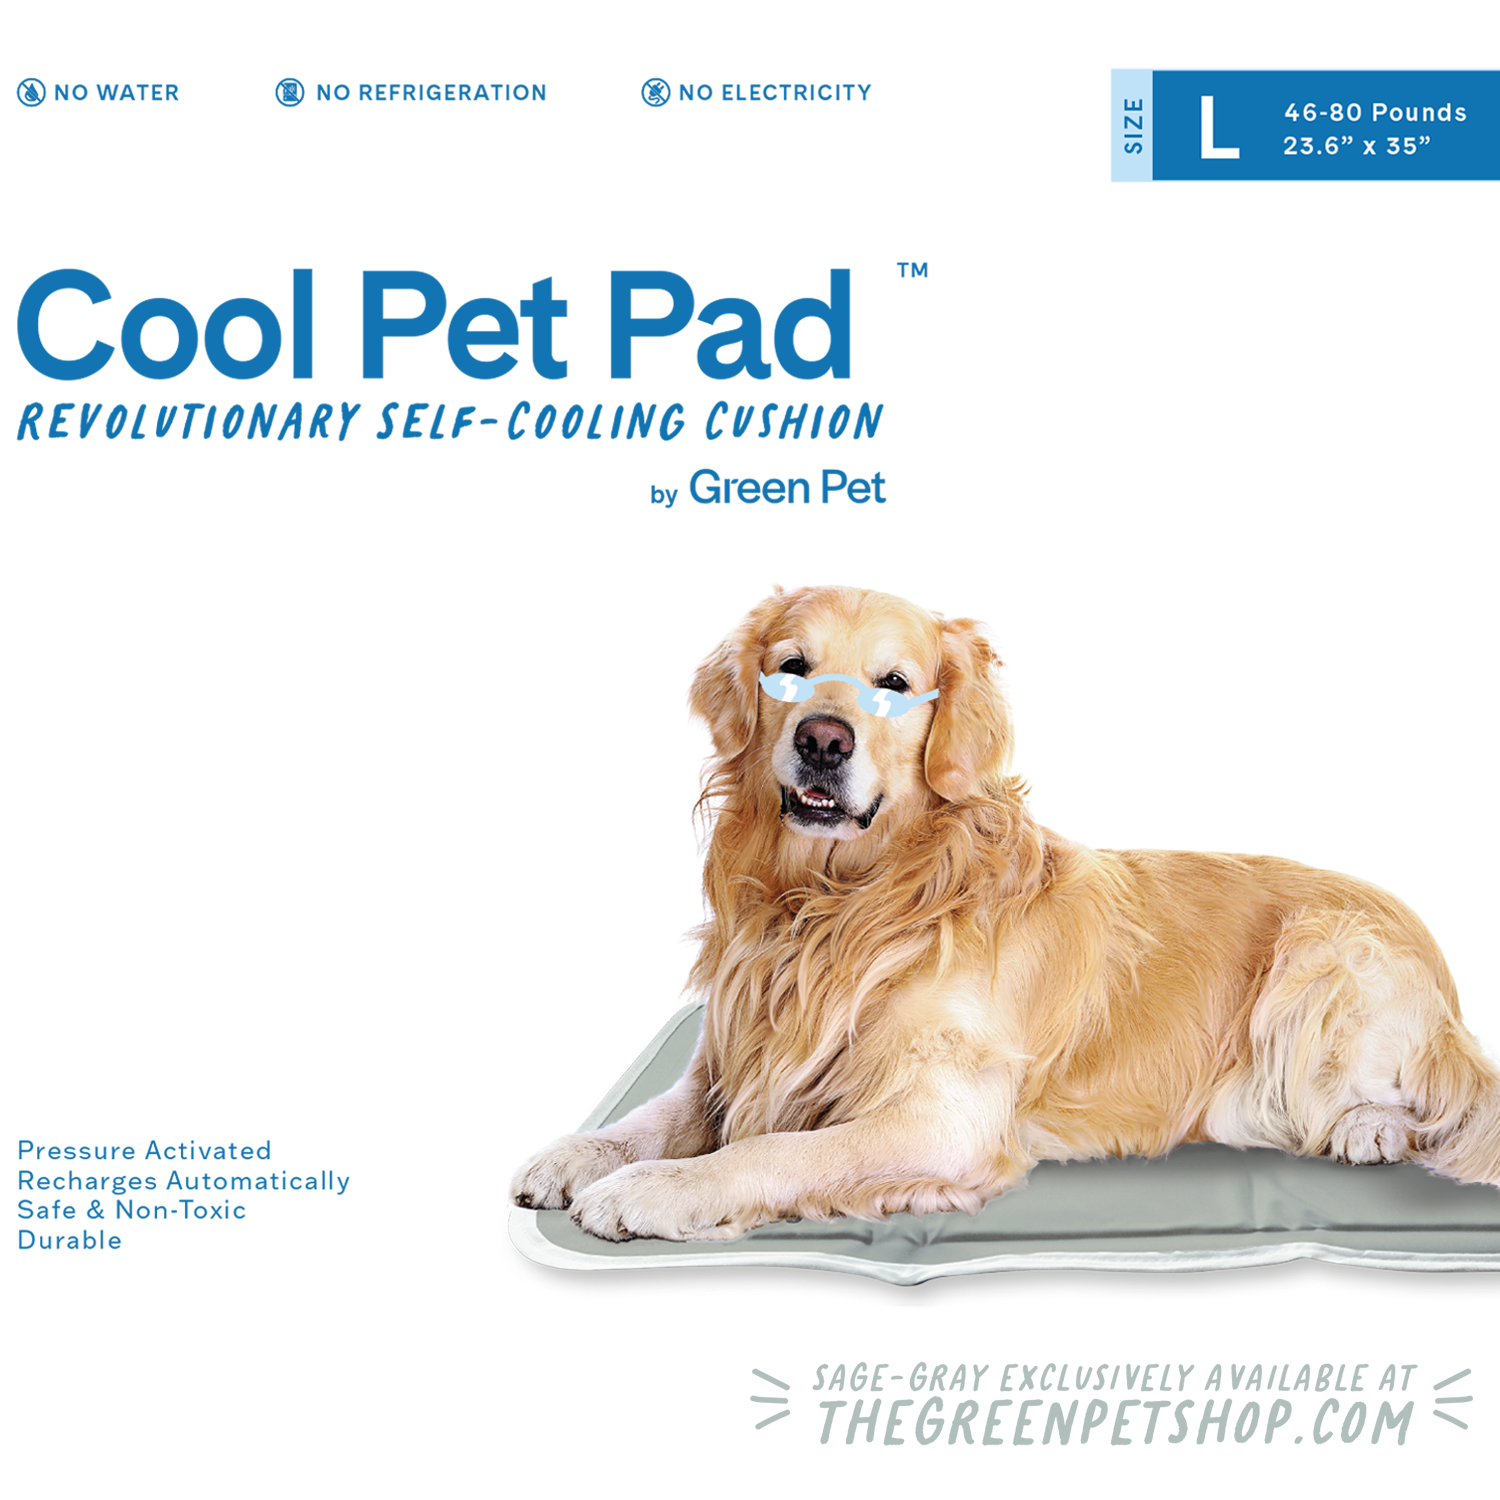  Chillz Dog Cooling Mat, Large - Pressure Activated